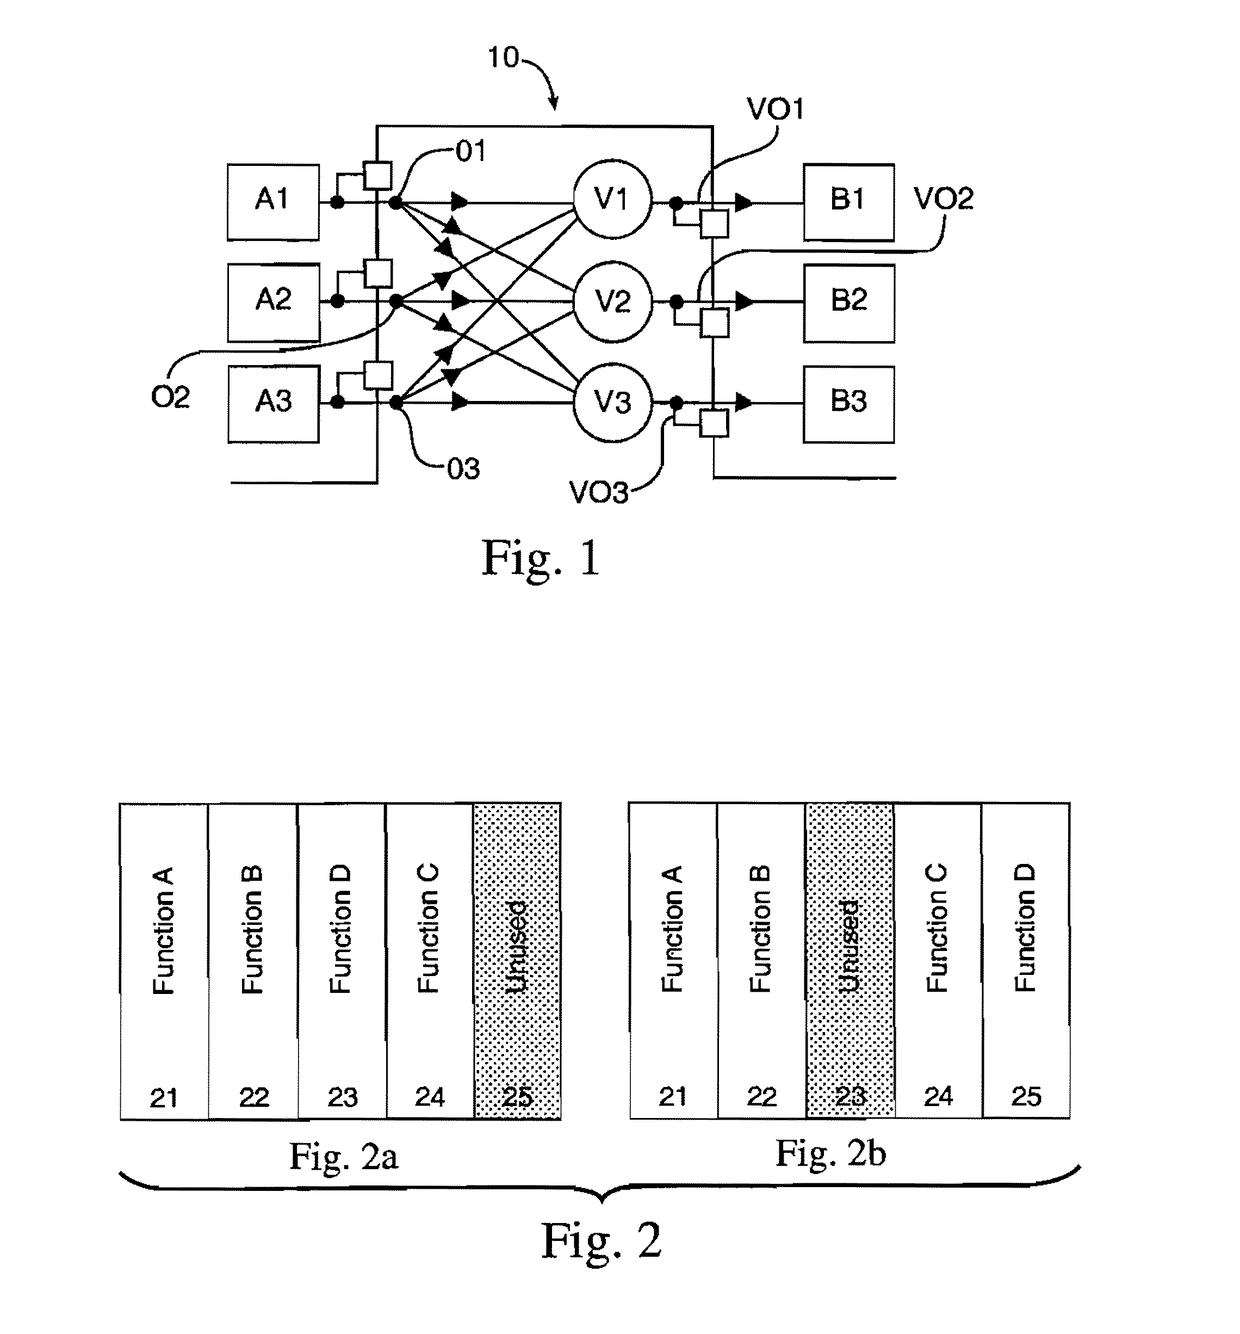 Relocatable field programmable gate array bitstreams for fault tolerance